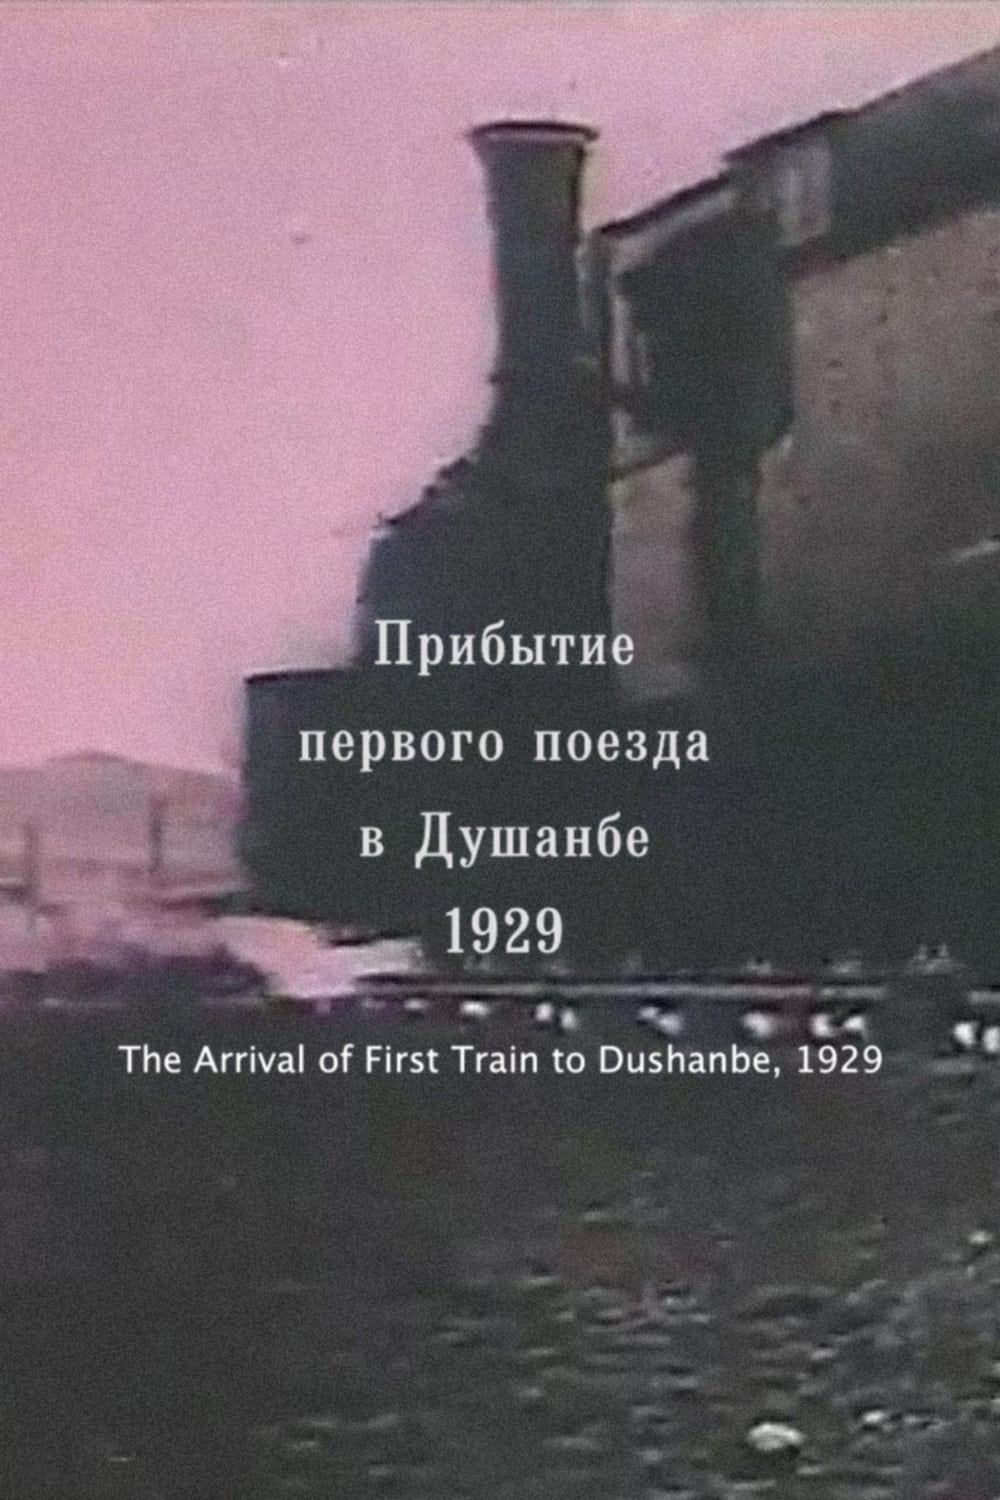 Soviet Tajikistan: Arrival of the first train in Dushanbe